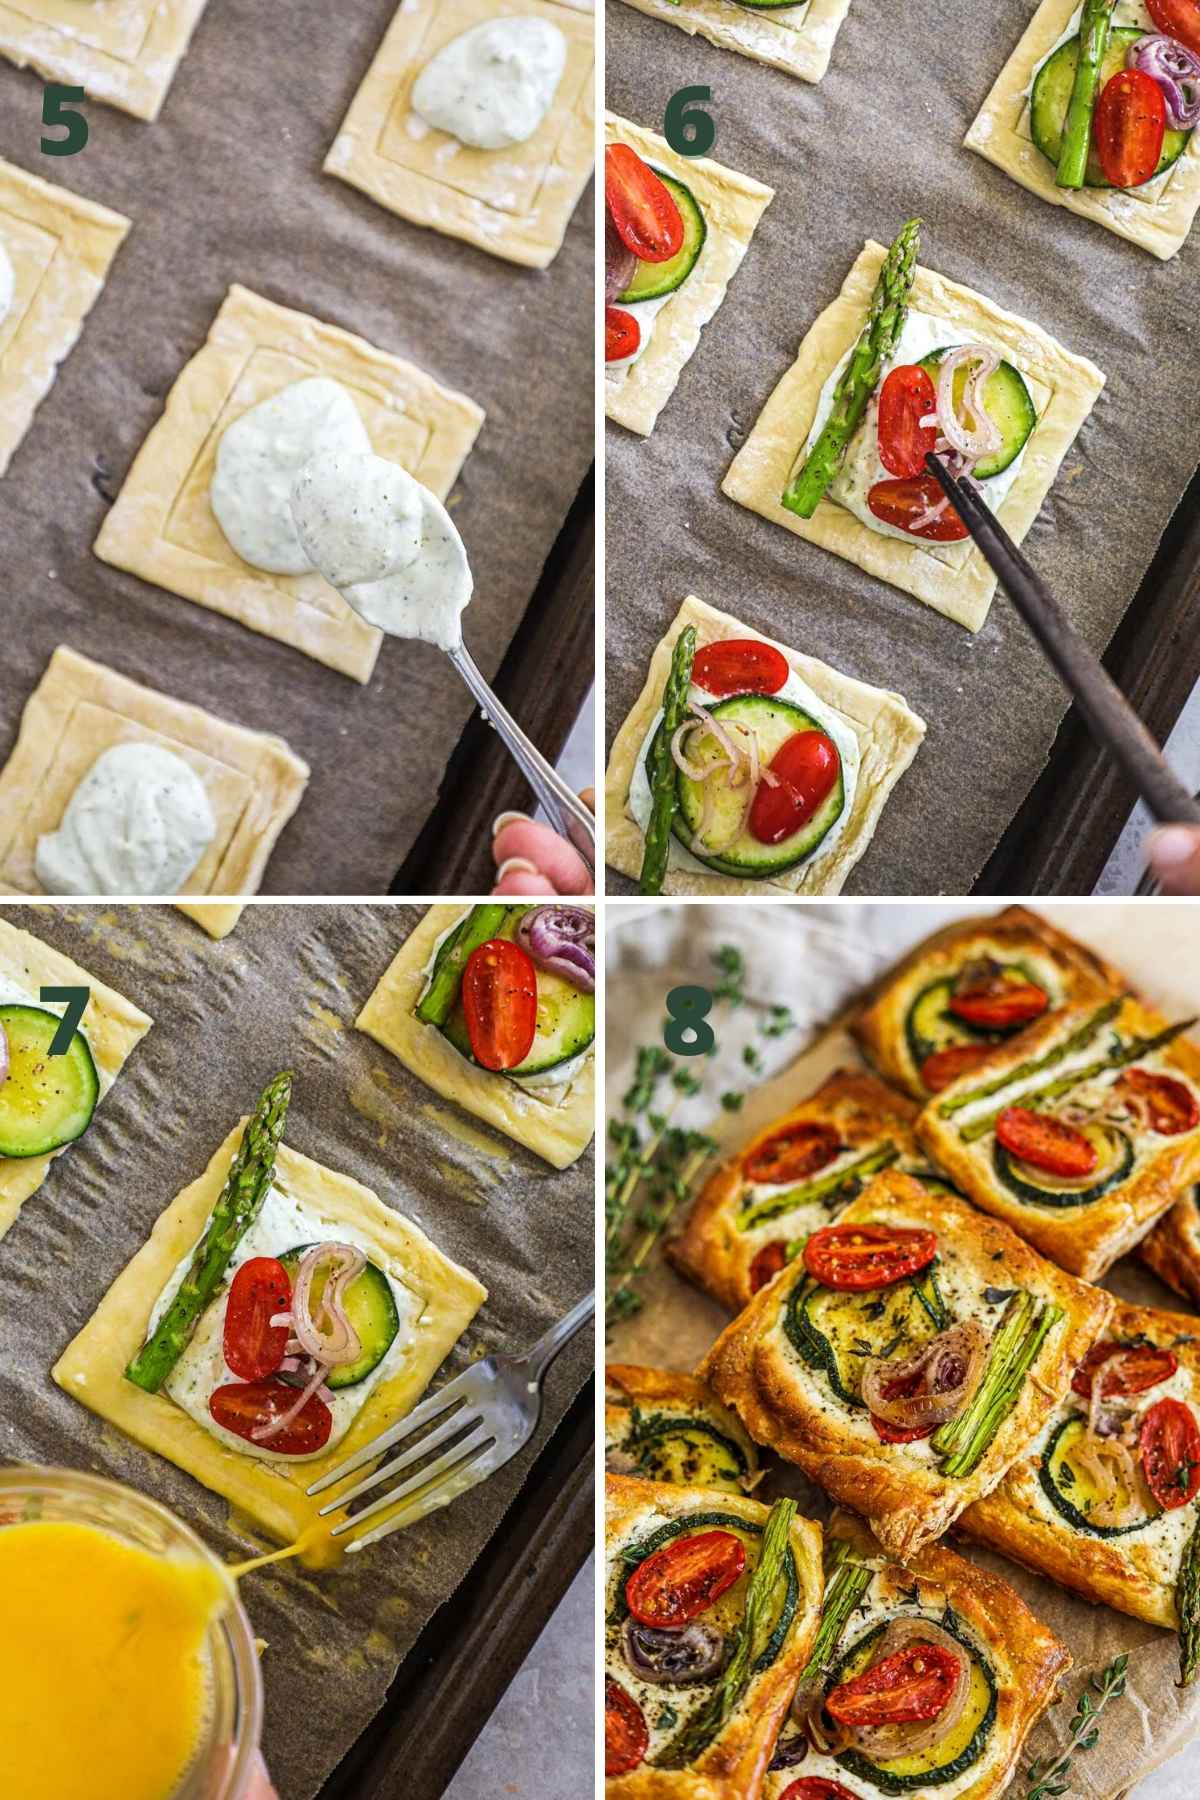 Steps to make puff pastry vegetable tarts, including adding the goat cheese to each tart, topping with vegetables, applying the egg wash, and baking.